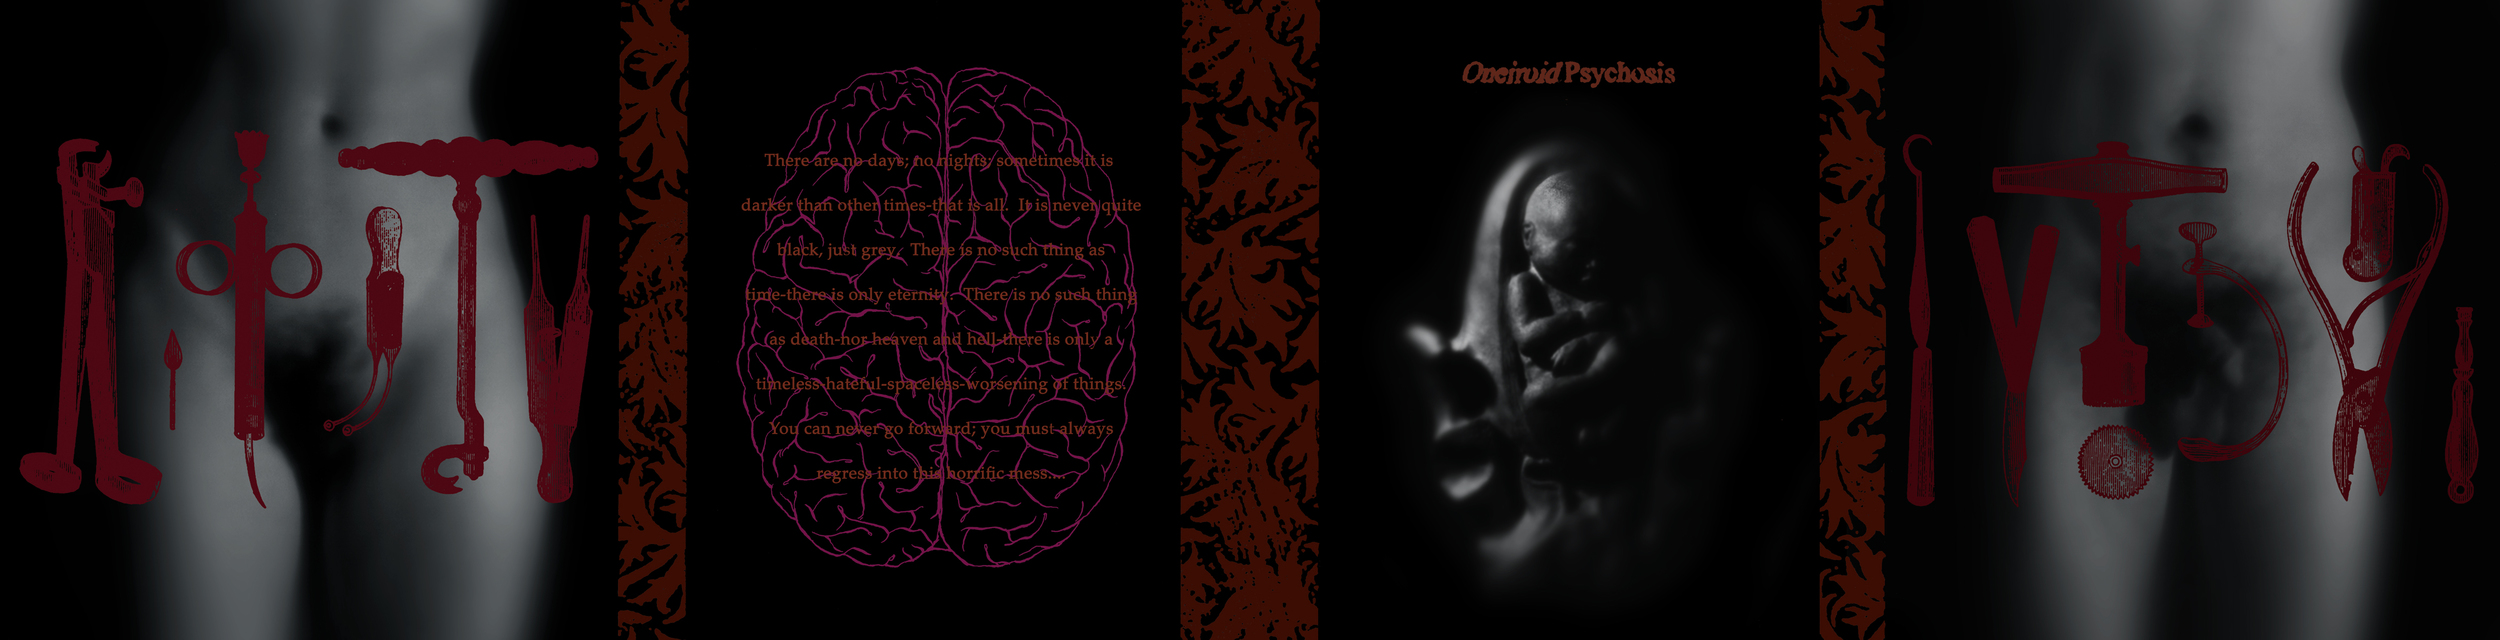   Oneiroid Psychosis,  Stillbirth . Gatefold CD booklet . 1995. Sculpted clay fetus and womb, Photography, Pen and ink,&nbsp;Found medical instrument illustrations. Released by Decibel Records. 